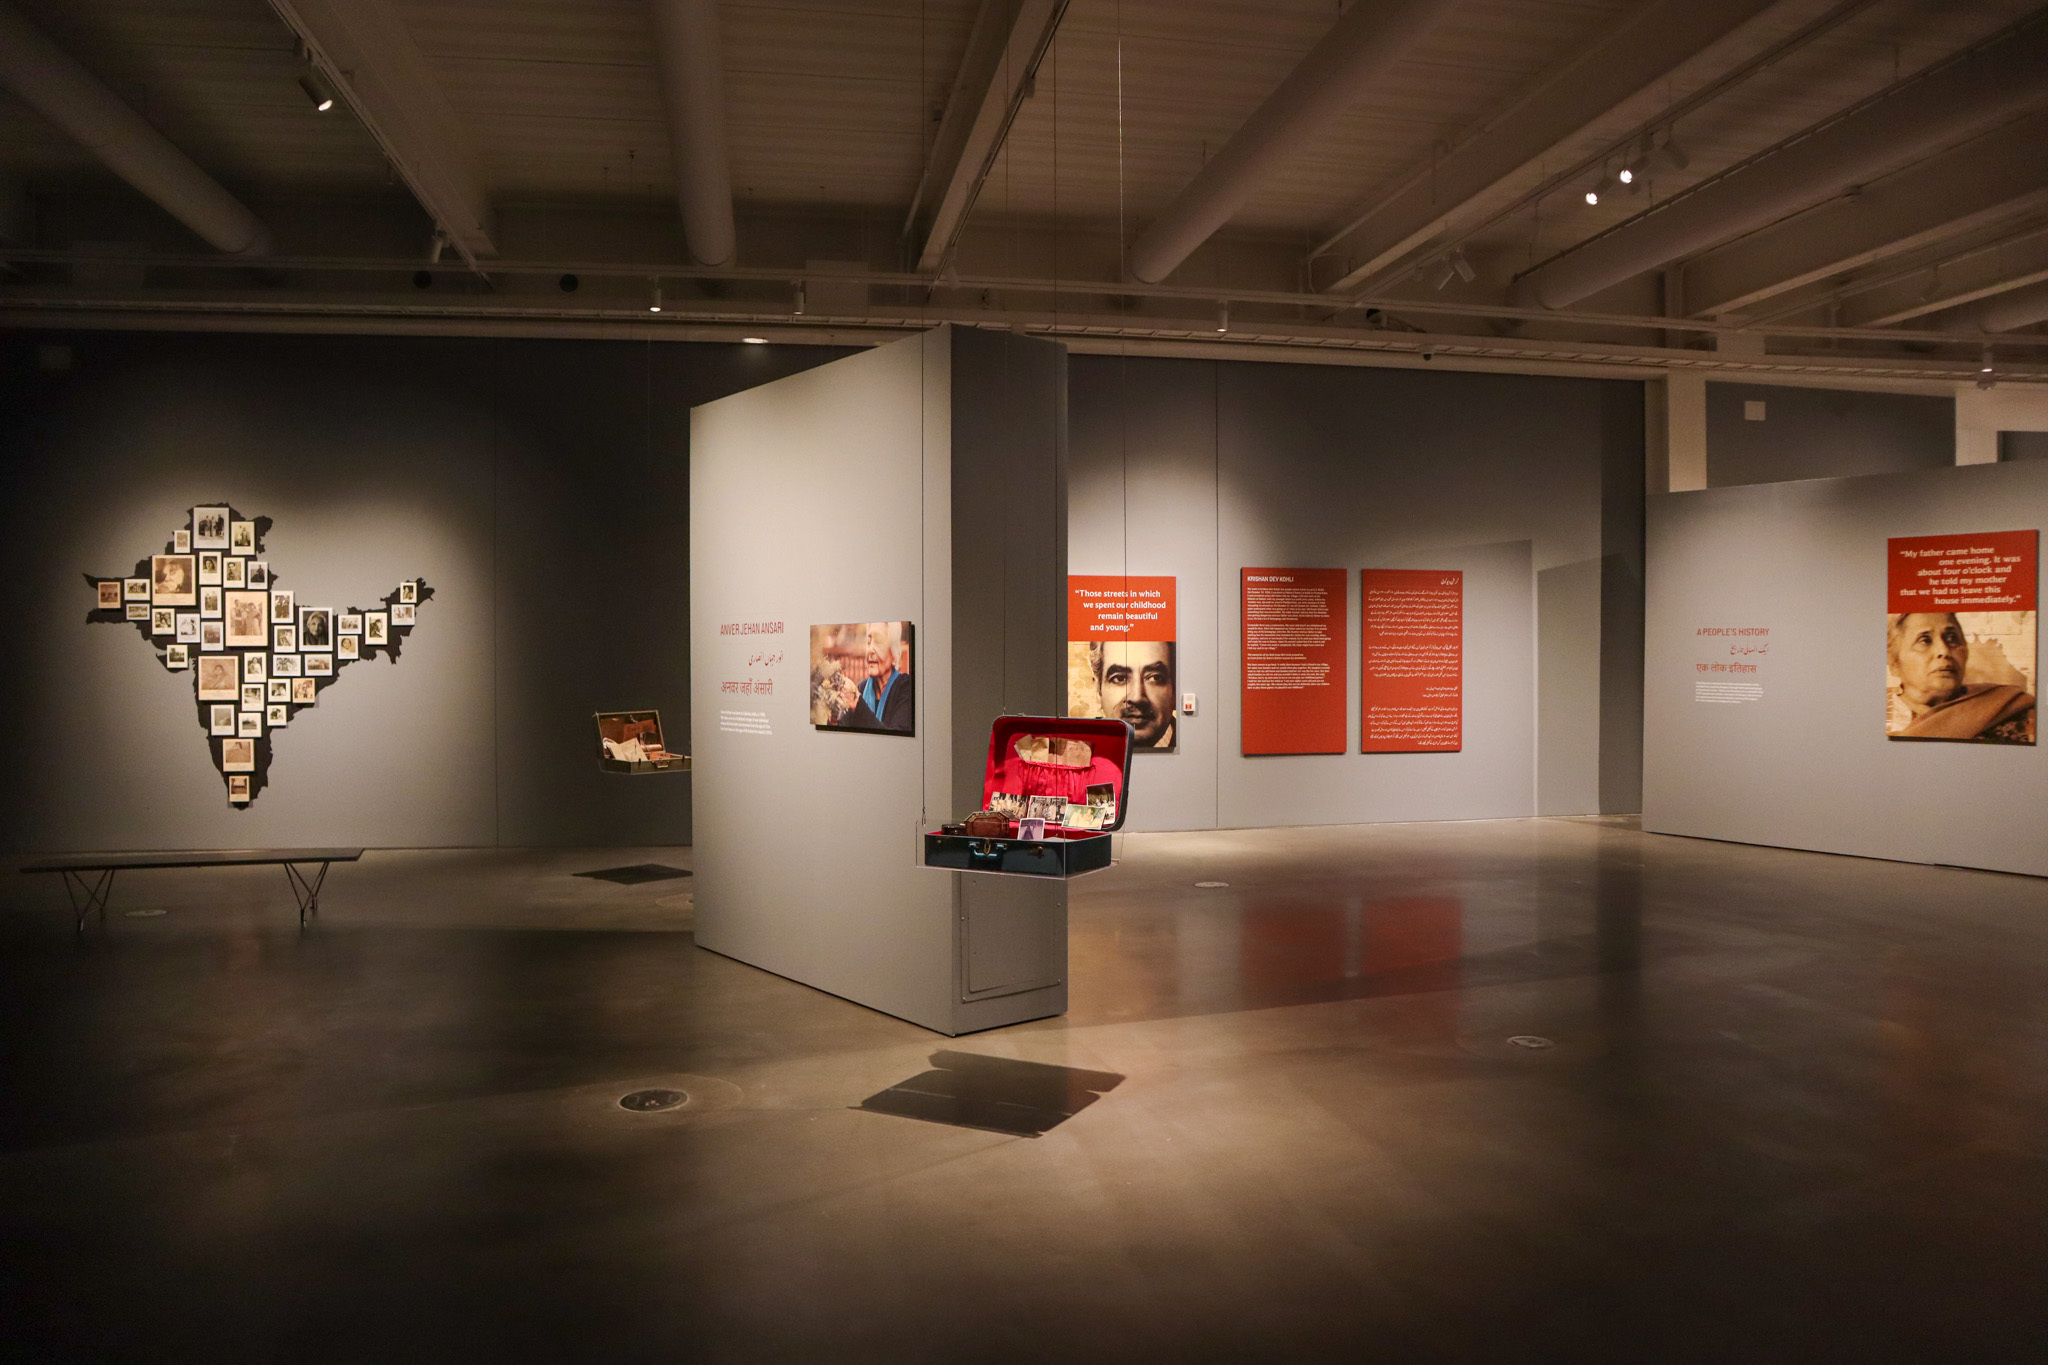 An art gallery shows a suitcase hanging from the ceiling in the middle of a room with a map of India to the left, and orange boards with white writing to the right